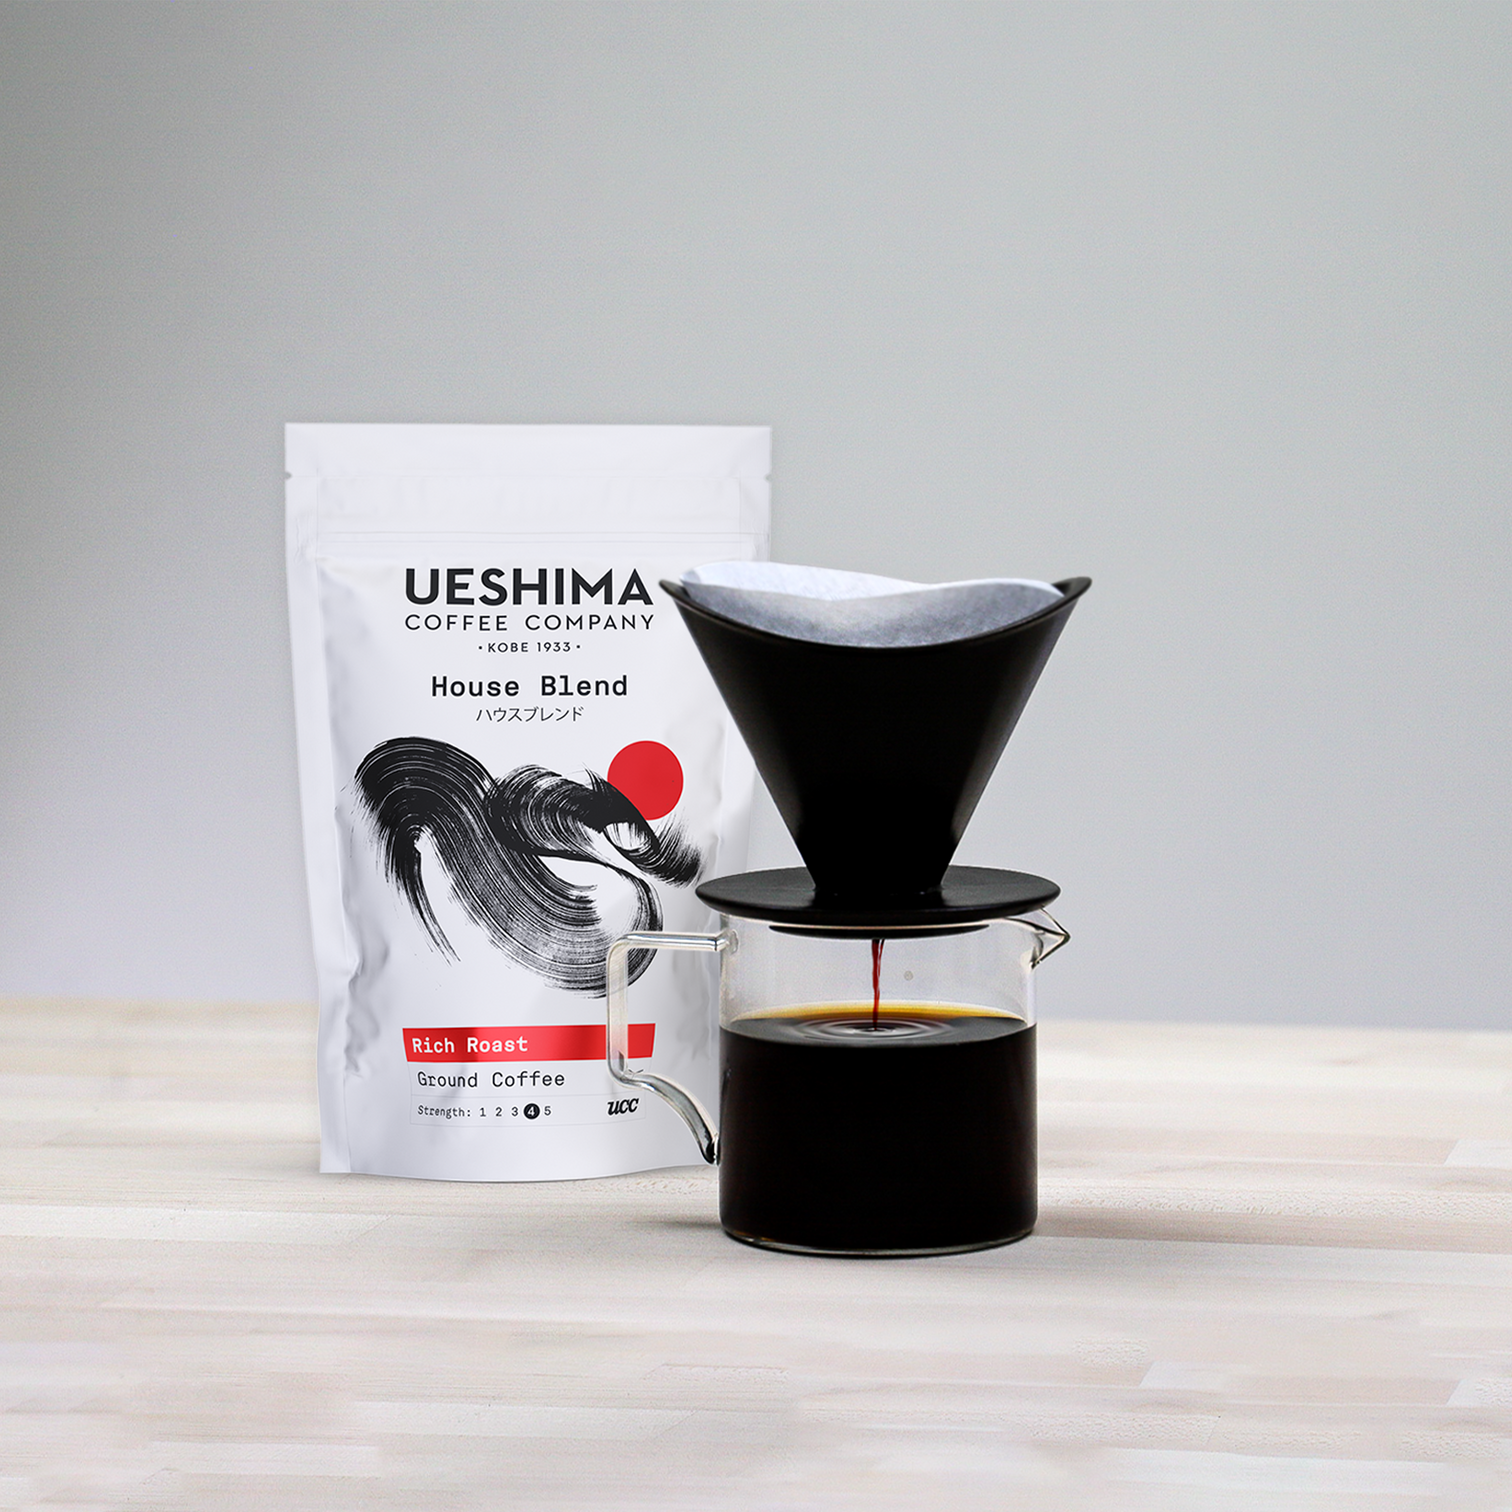 6 Christmas gifts for coffee lovers